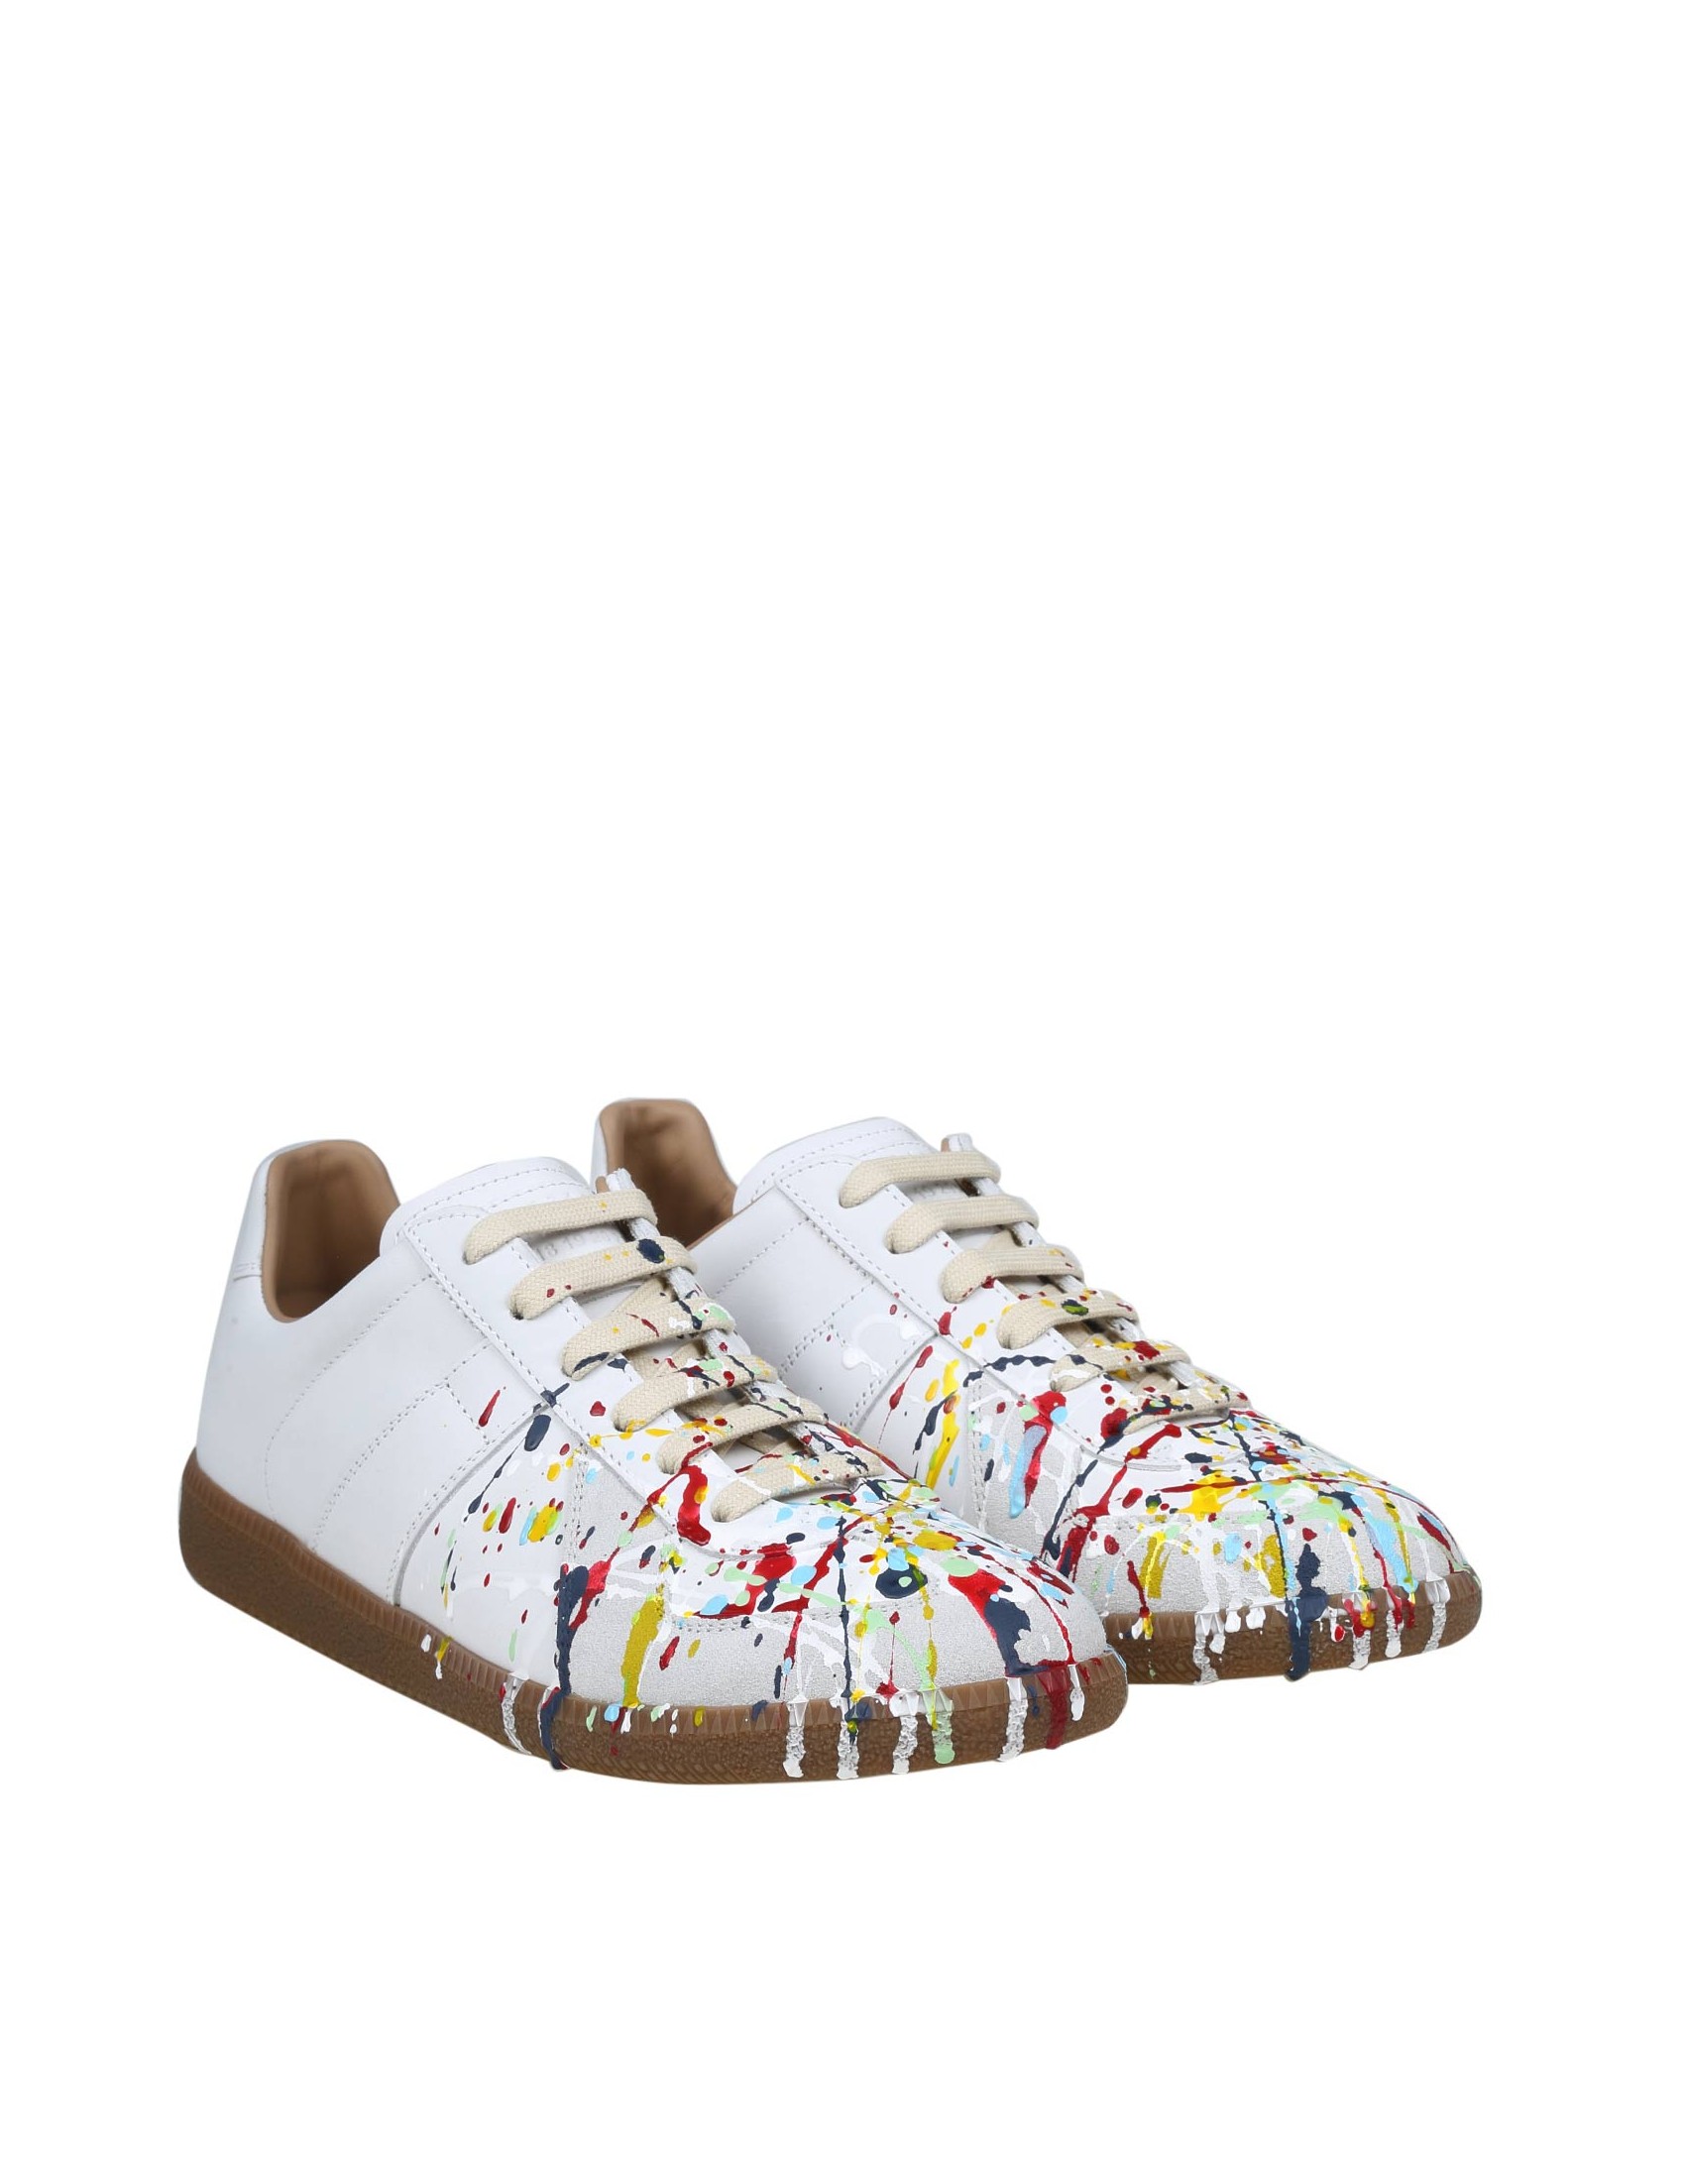 MARGIELA LEATHER REPLICA WITH POLLOCK DETAIL